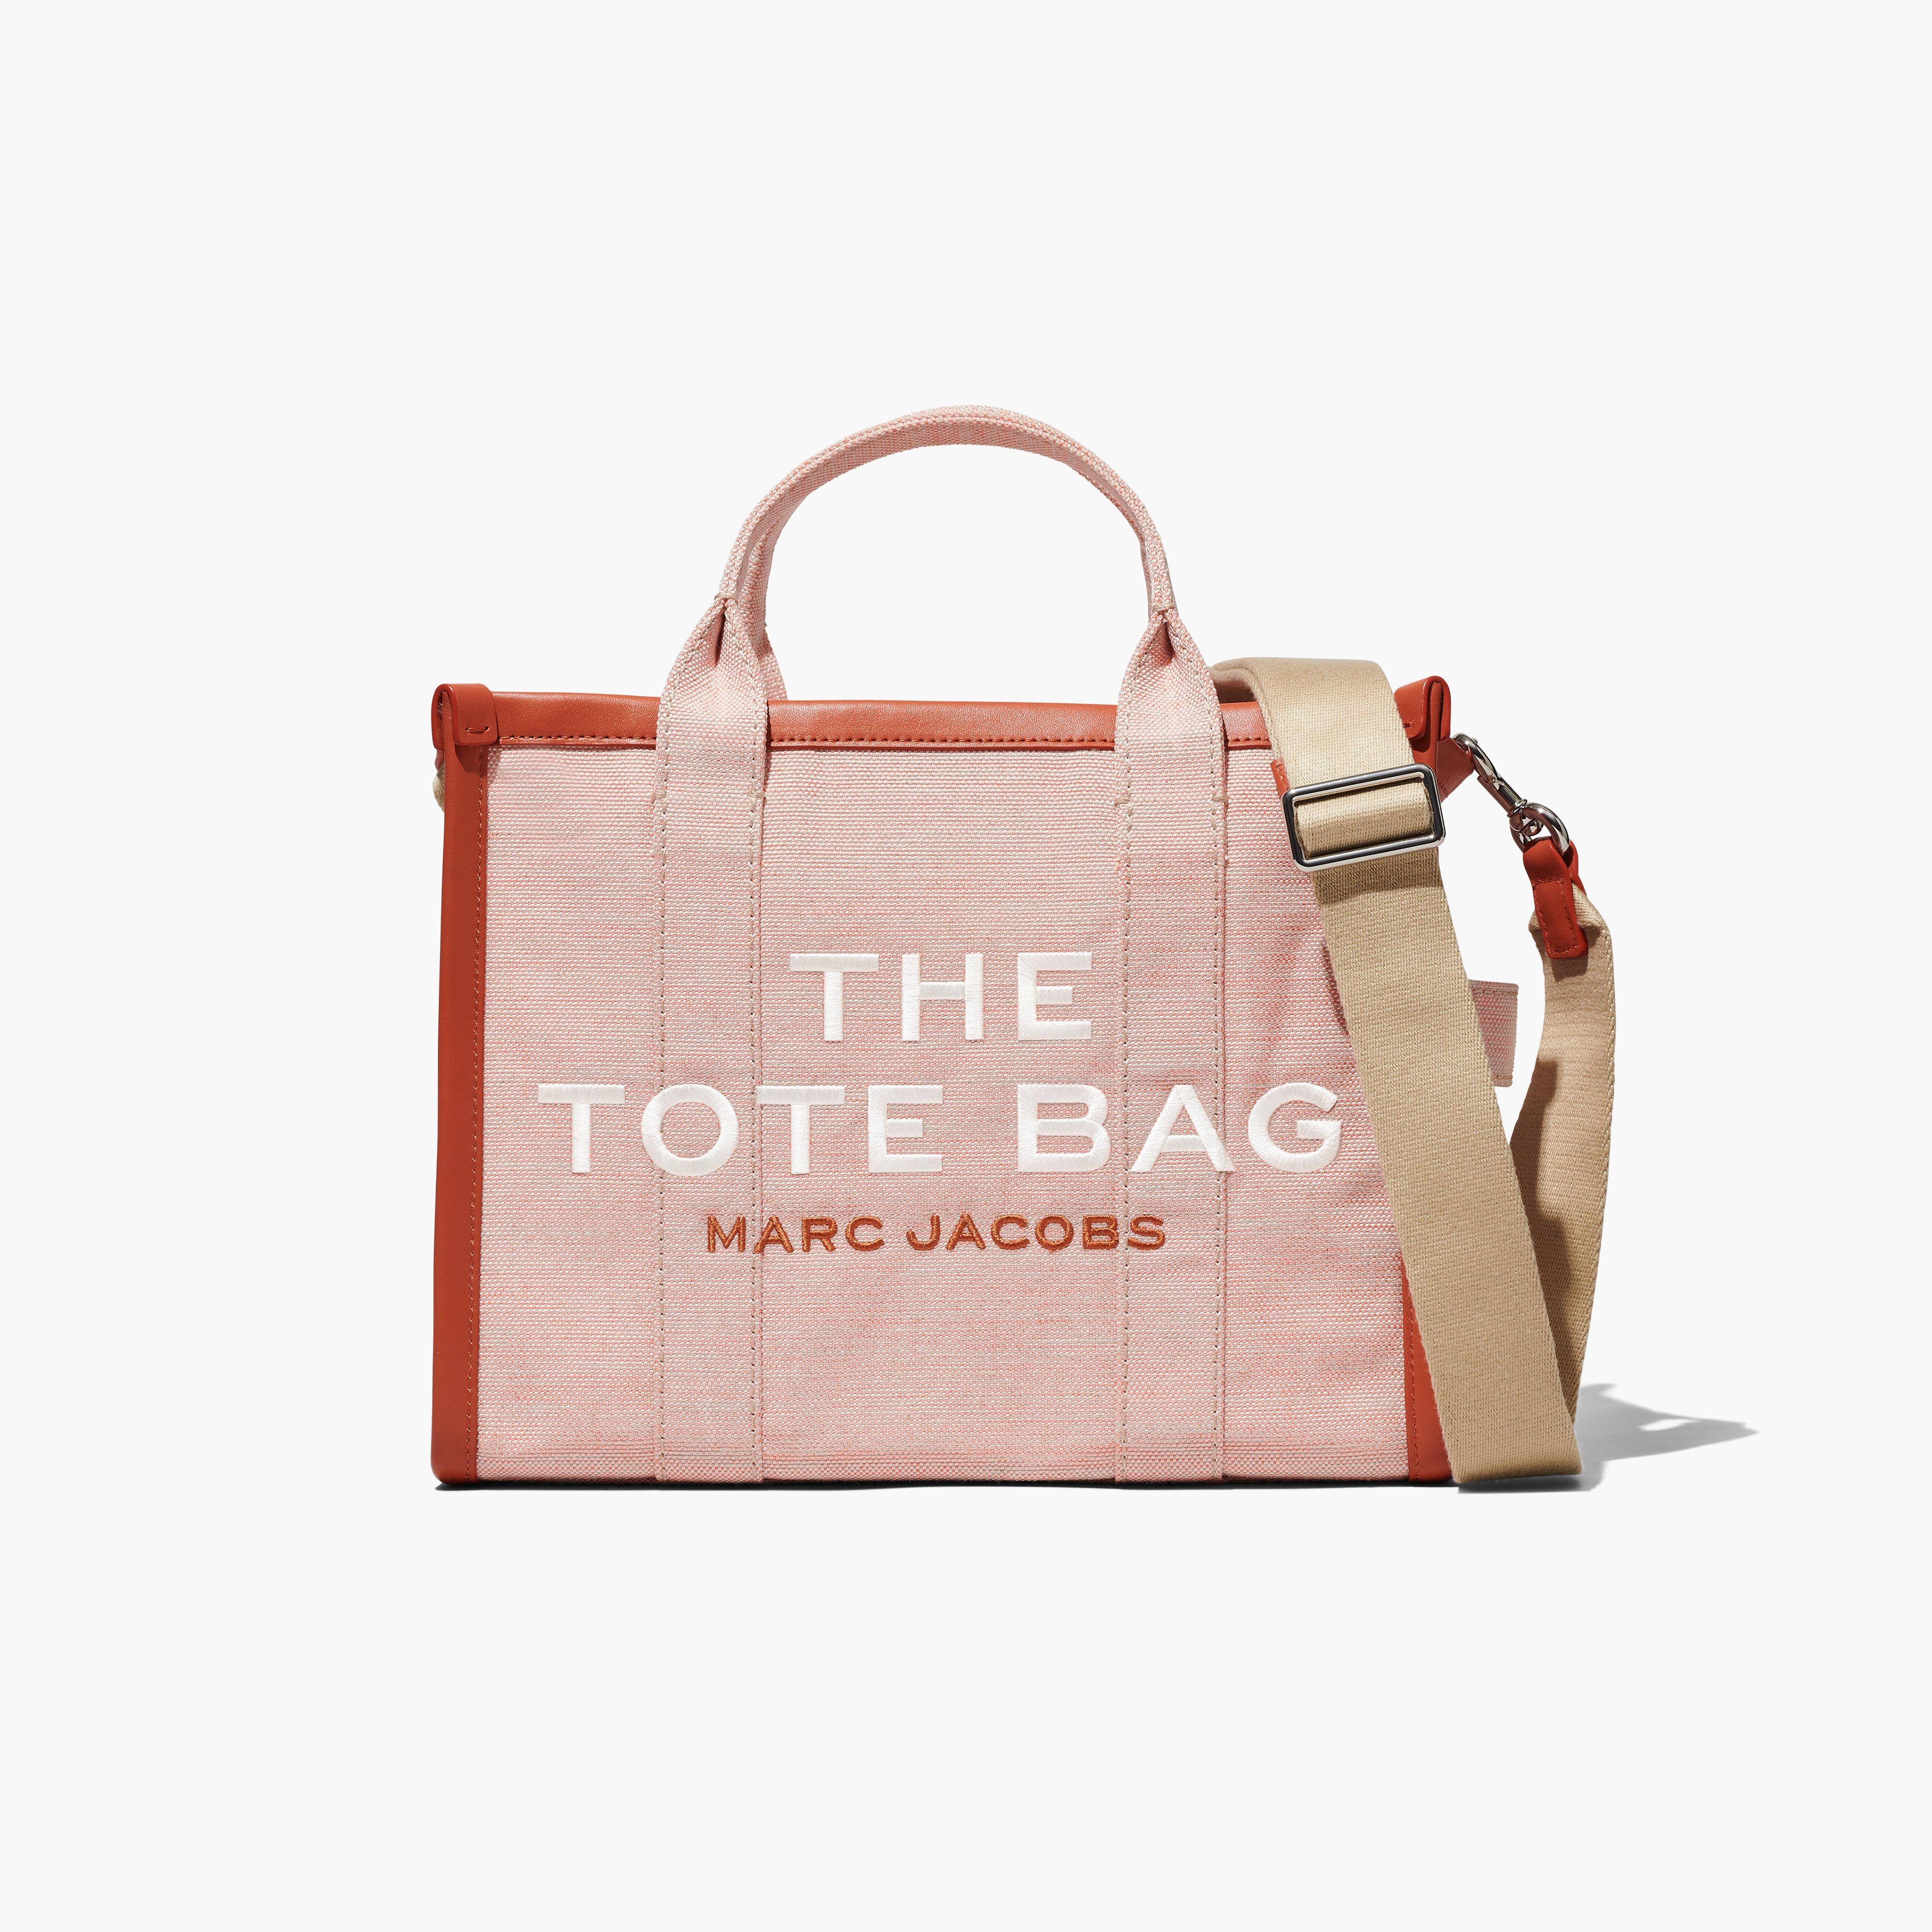 MARC JACOBS TOTE BAG: THE MUST-HAVE ACCESSORY OF THE SUMMER - Who invented  the tote bag? What to put in a Mark Jacobs mini tote bag? 4 style ideas  with the Marc